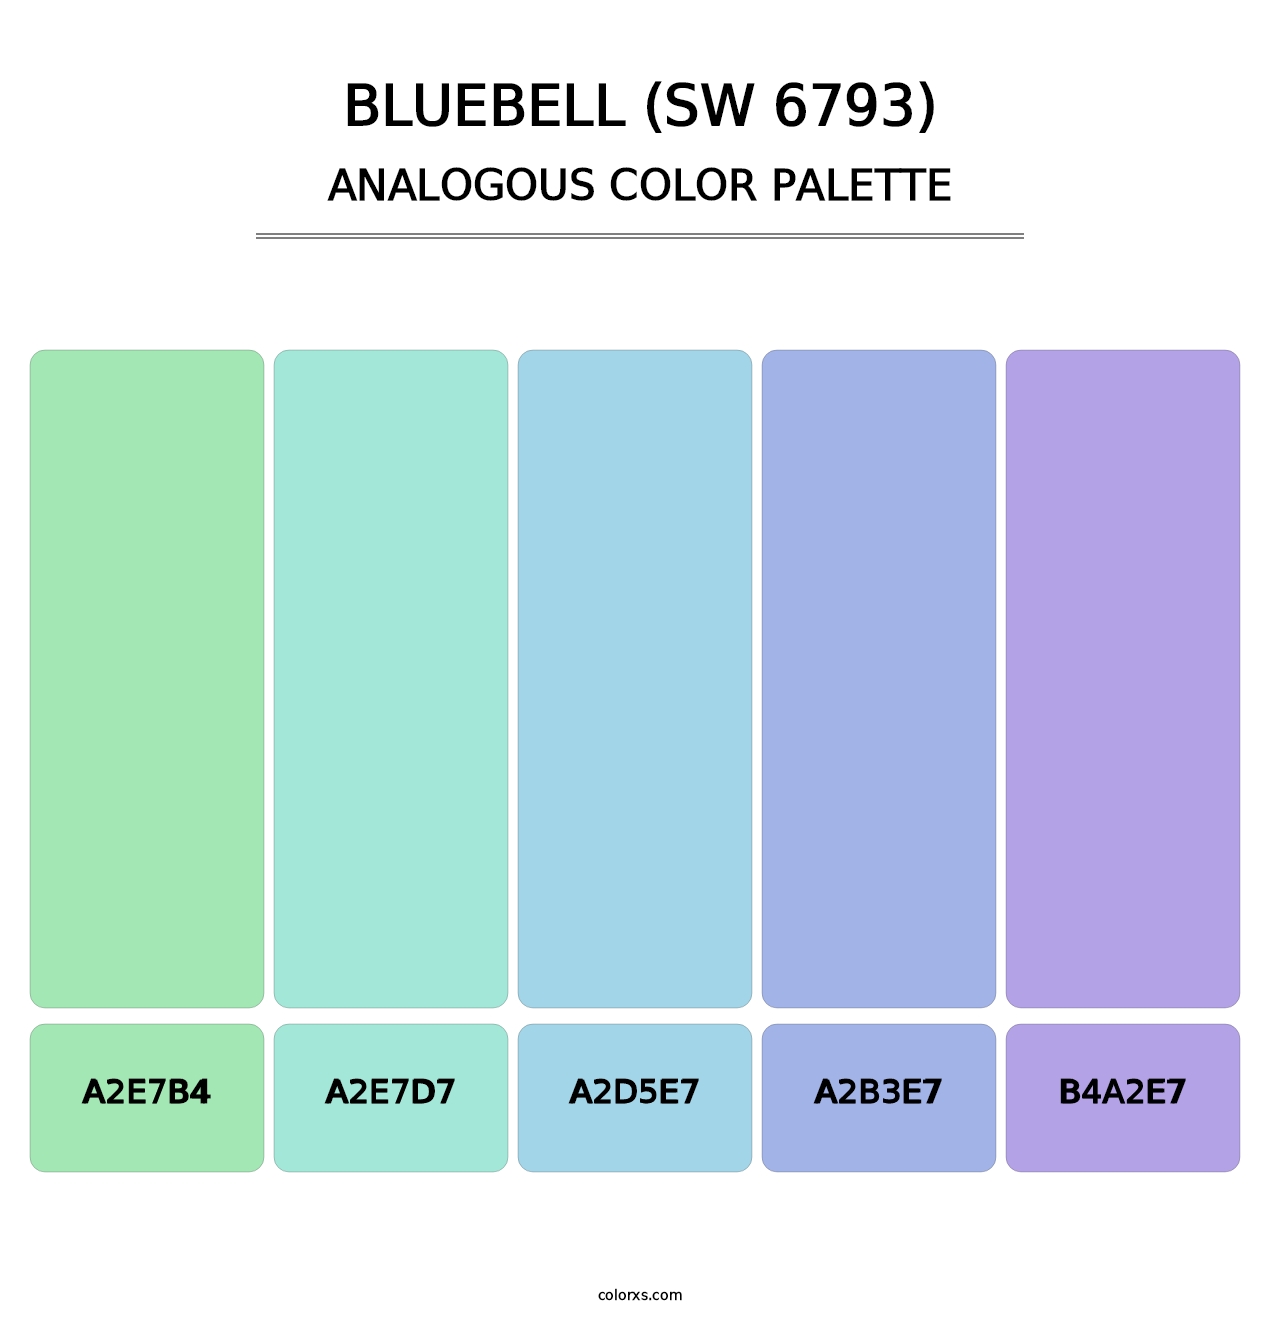 Bluebell (SW 6793) - Analogous Color Palette